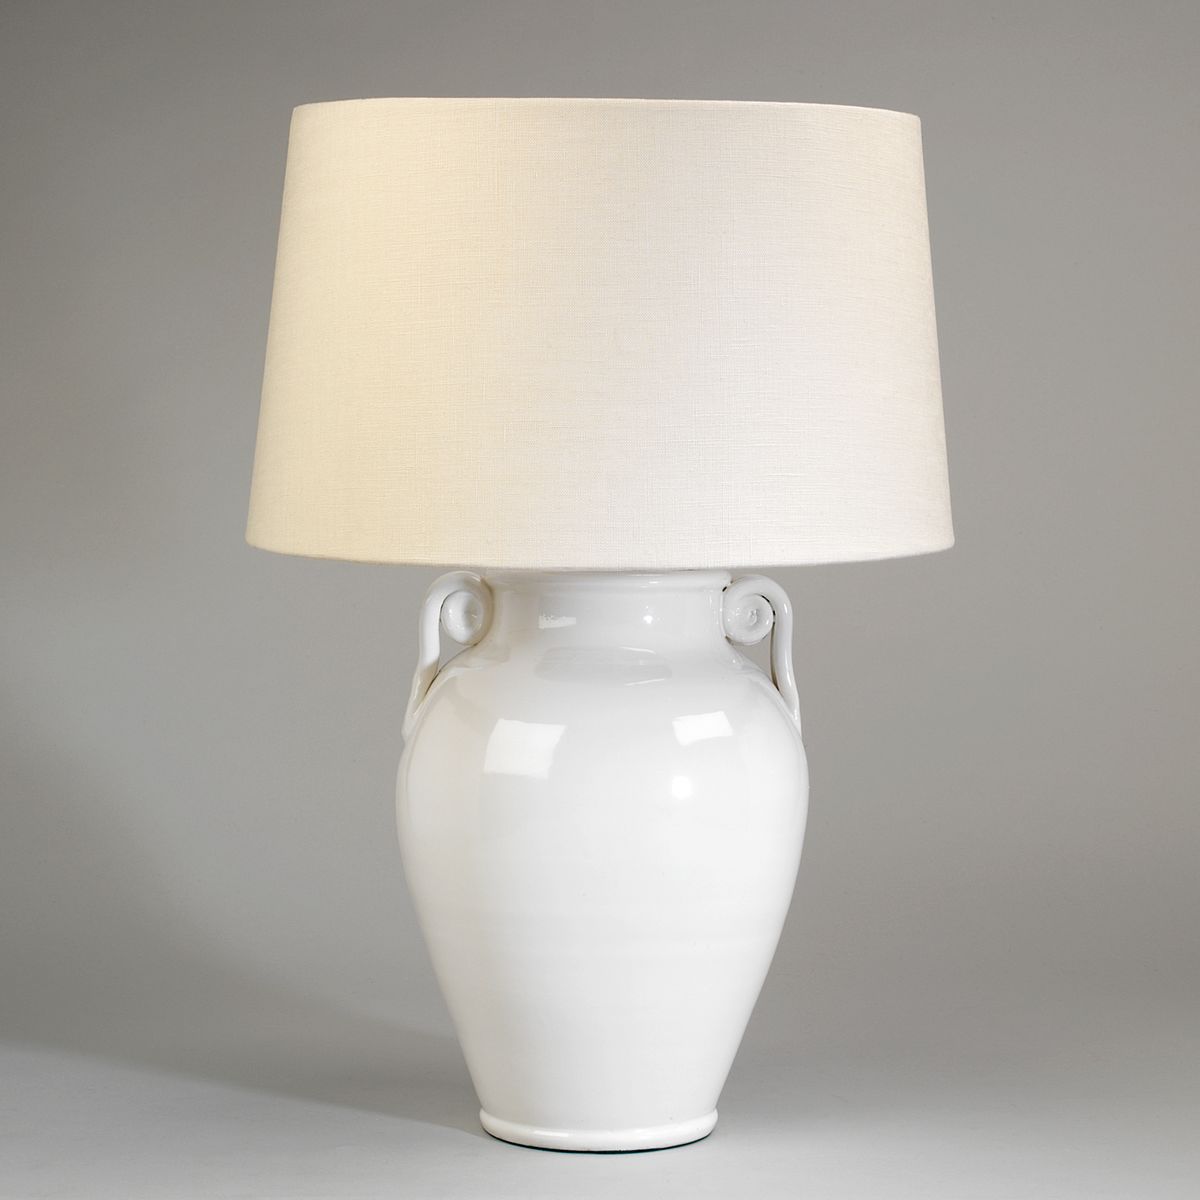 White Ceramic Vase Table Lamp with Laminated Linen Lampshade